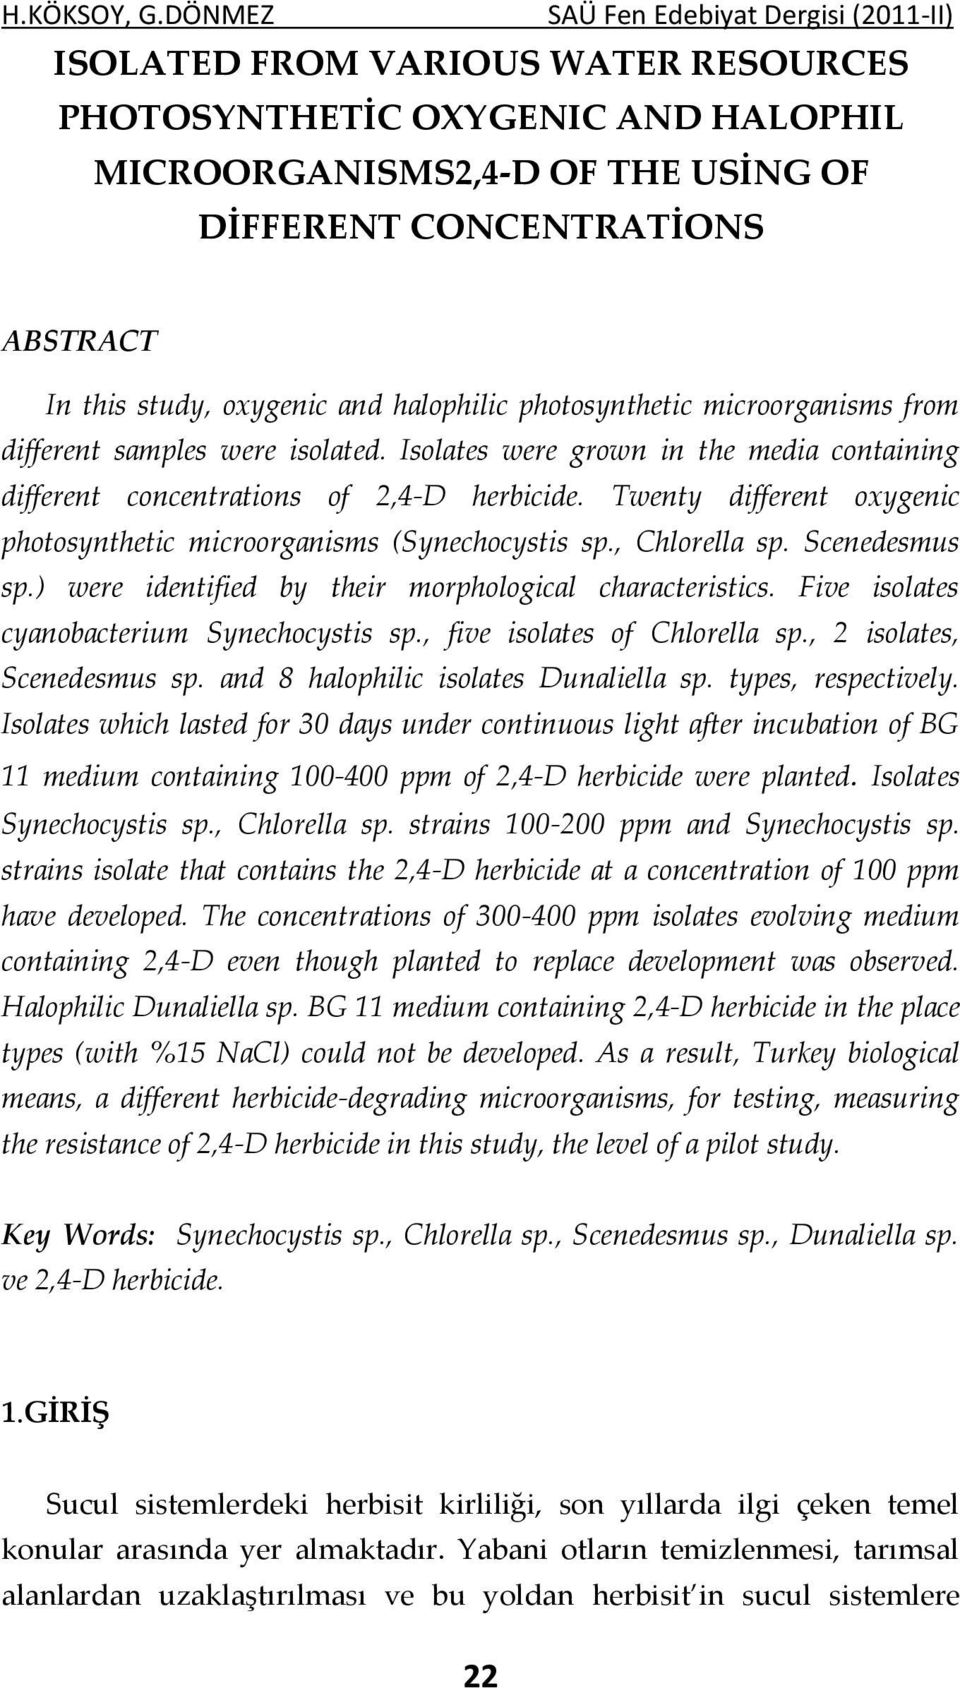 Twenty different oxygenic photosynthetic microorganisms (Synechocystis sp., Chlorella sp. Scenedesmus sp.) were identified by their morphological characteristics.